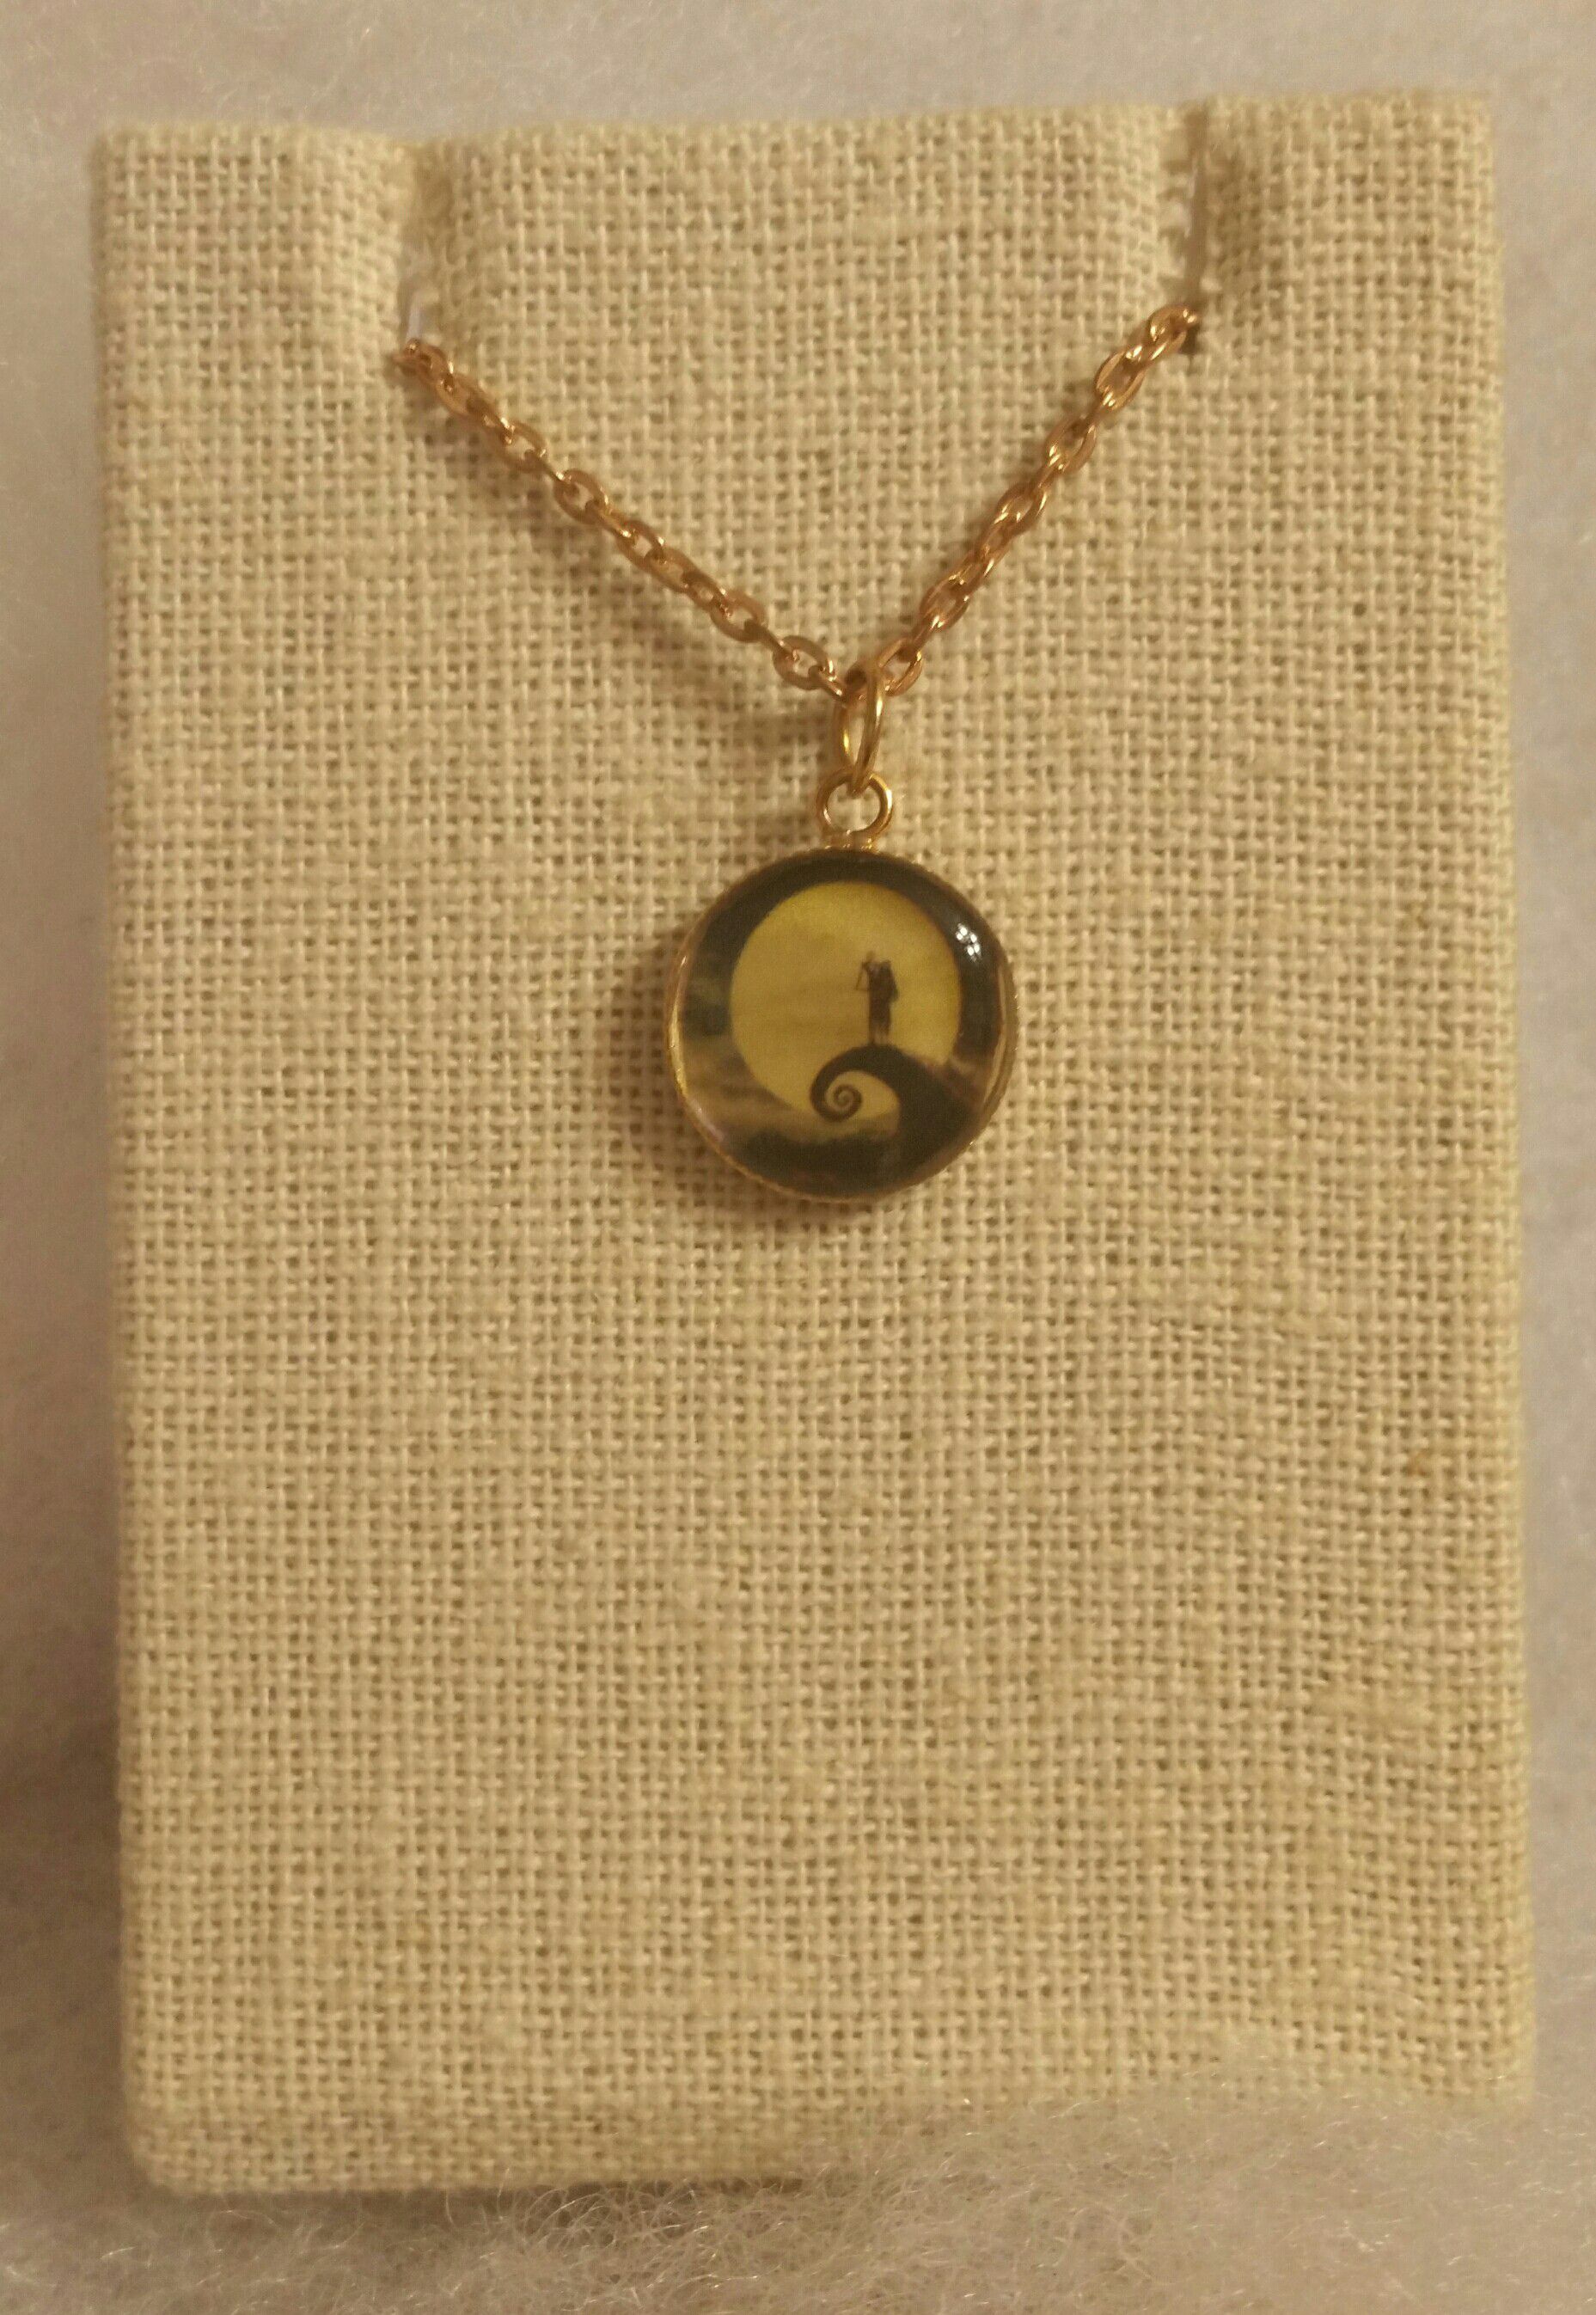 Handcrafted pendant necklace.